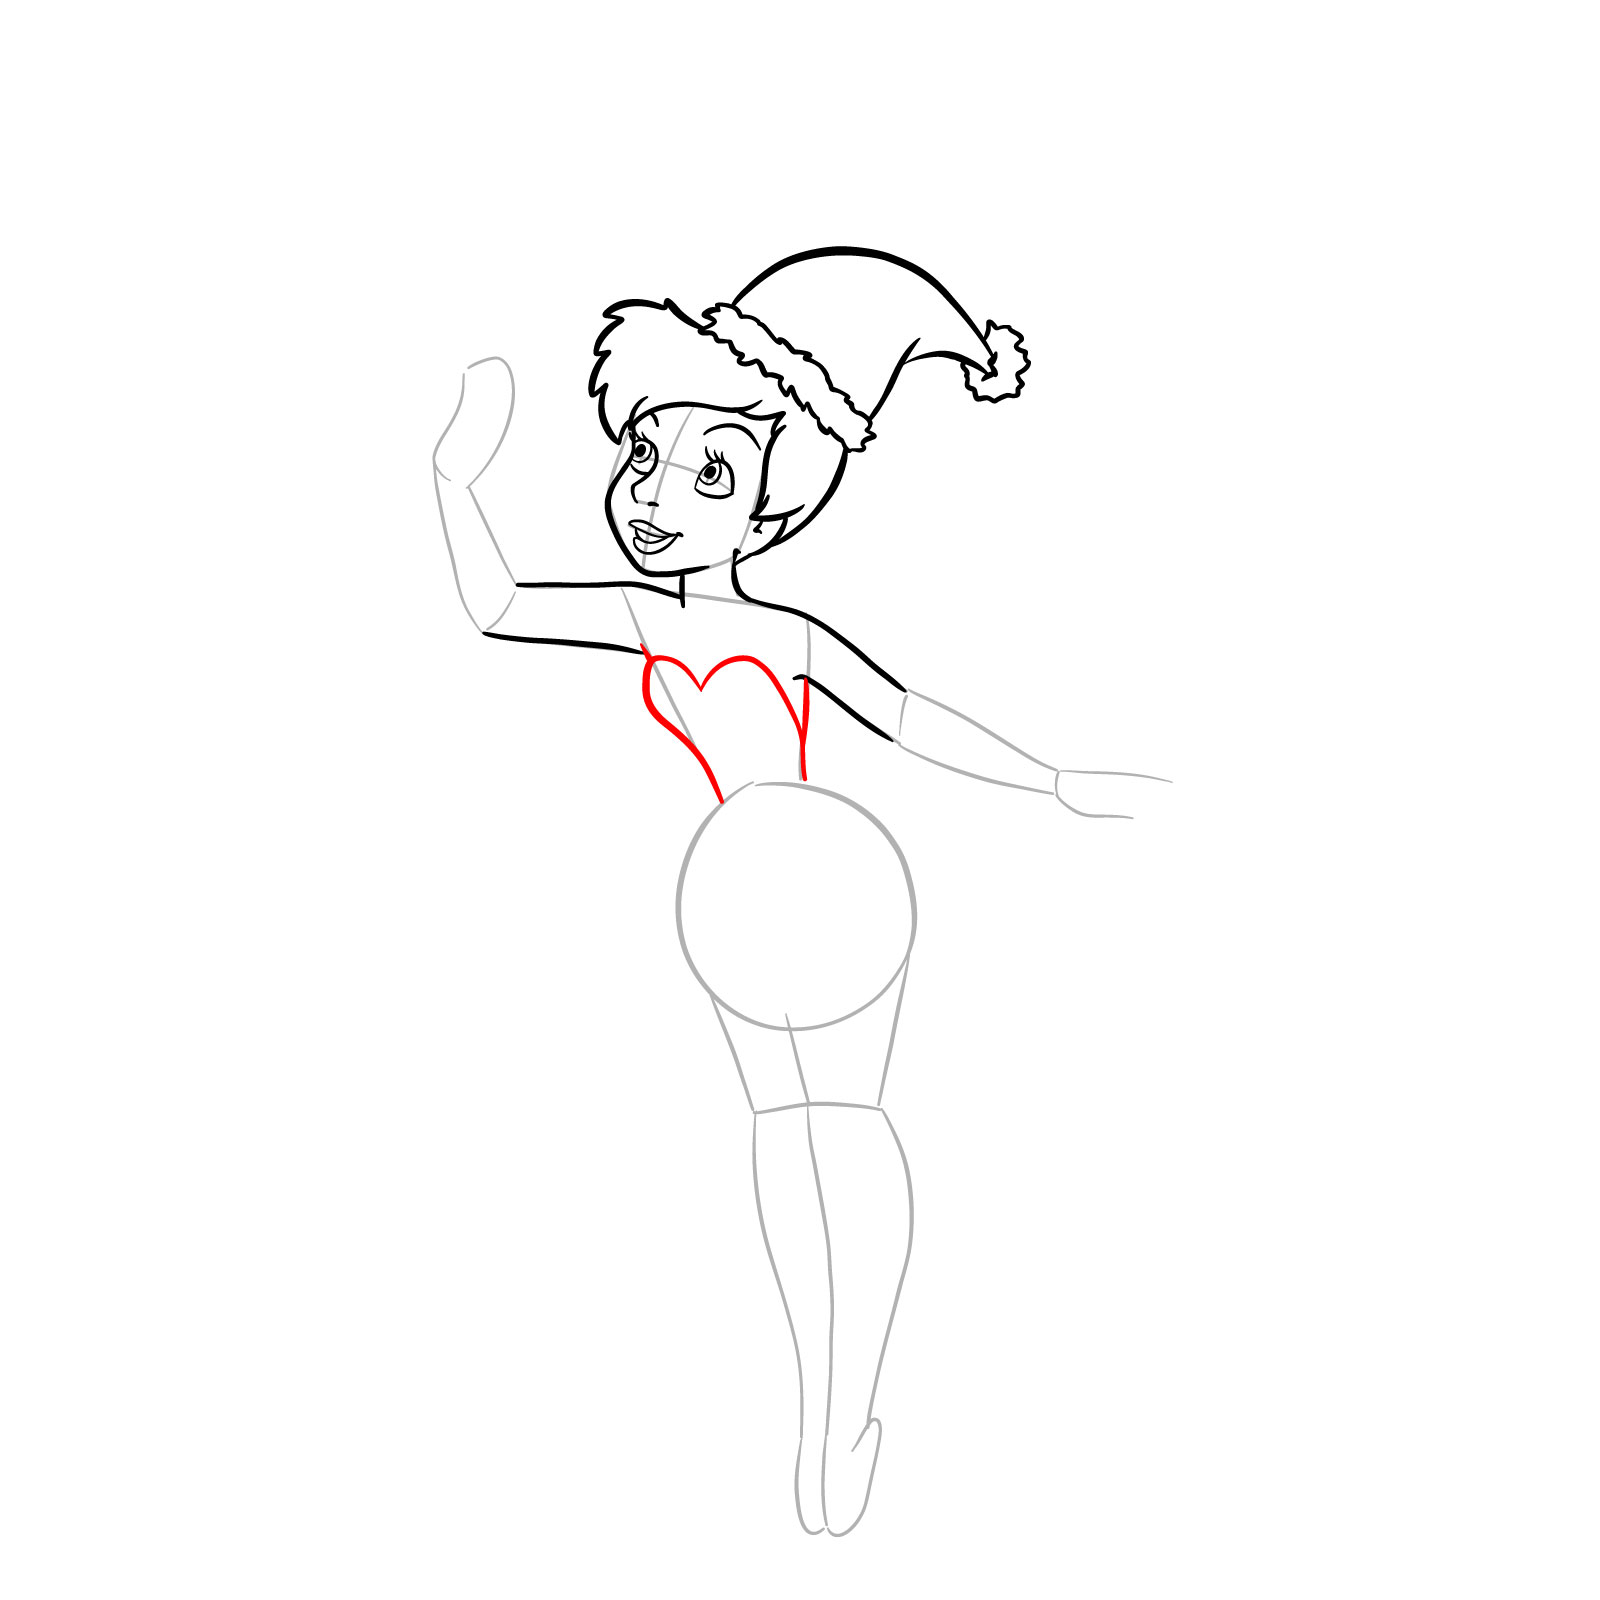 How to draw Tinker Bell in a Christmas costume - step 15